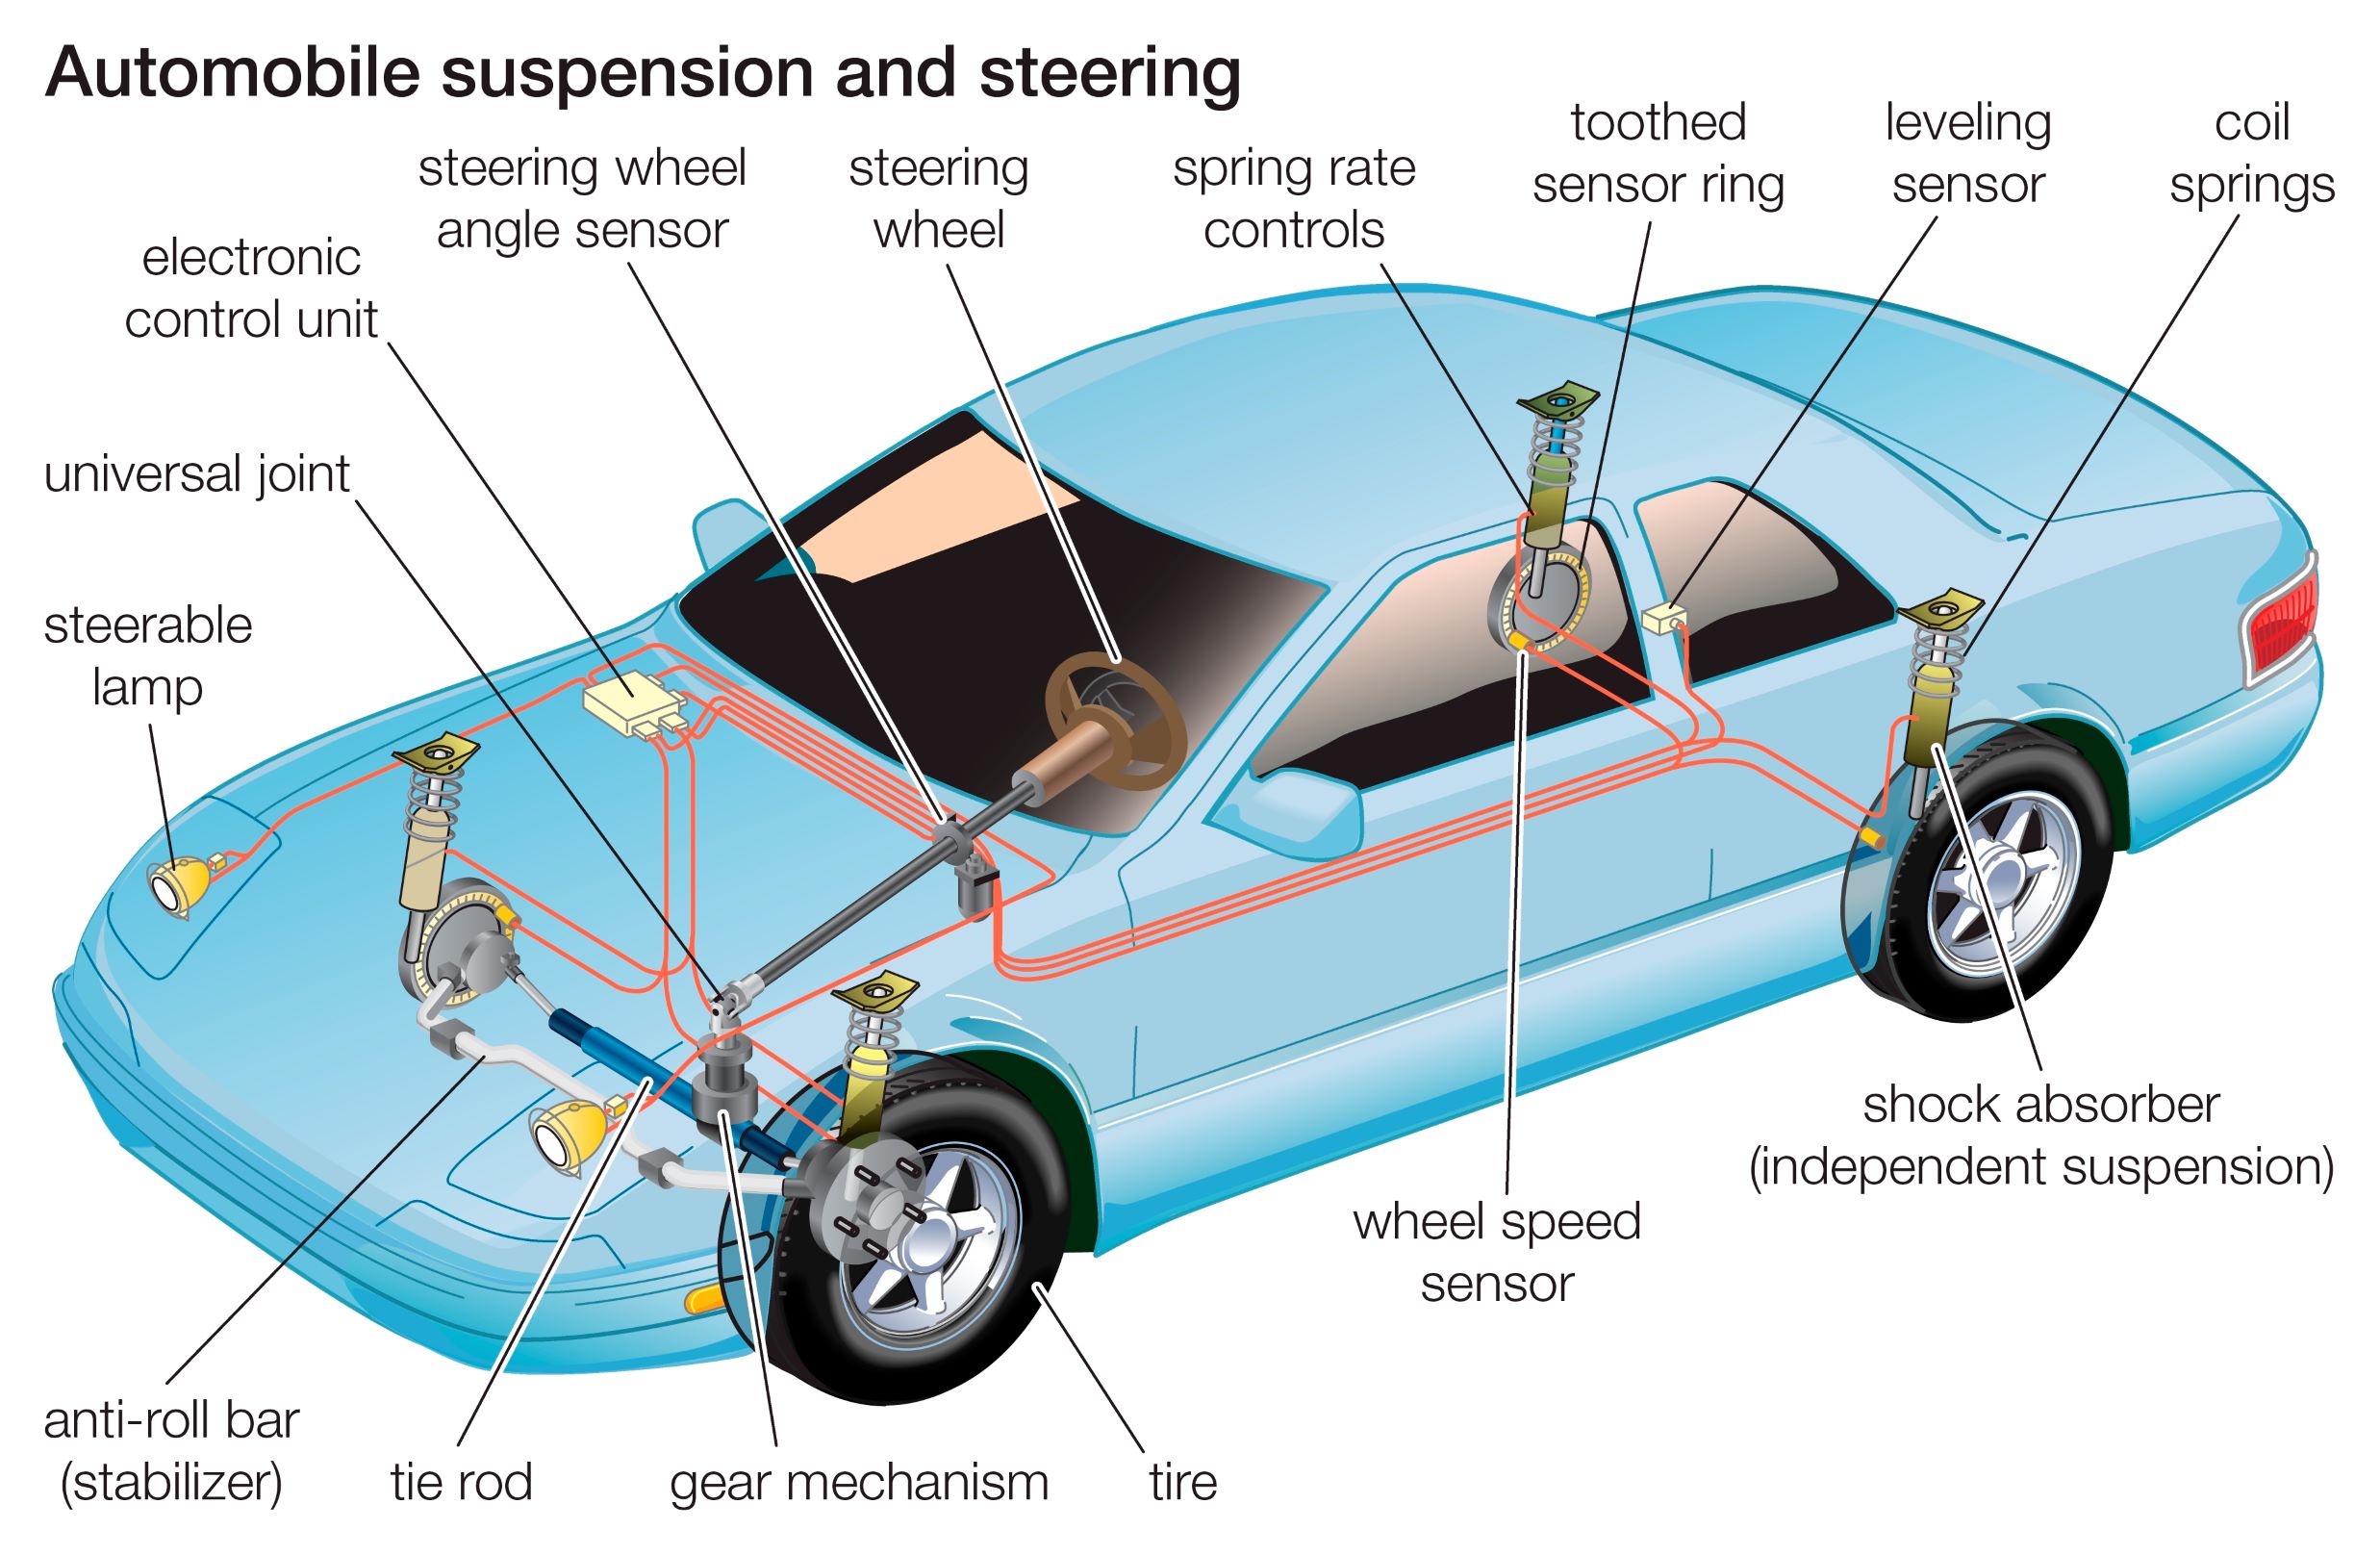 A labeled diagram of a car's steering and suspension systems